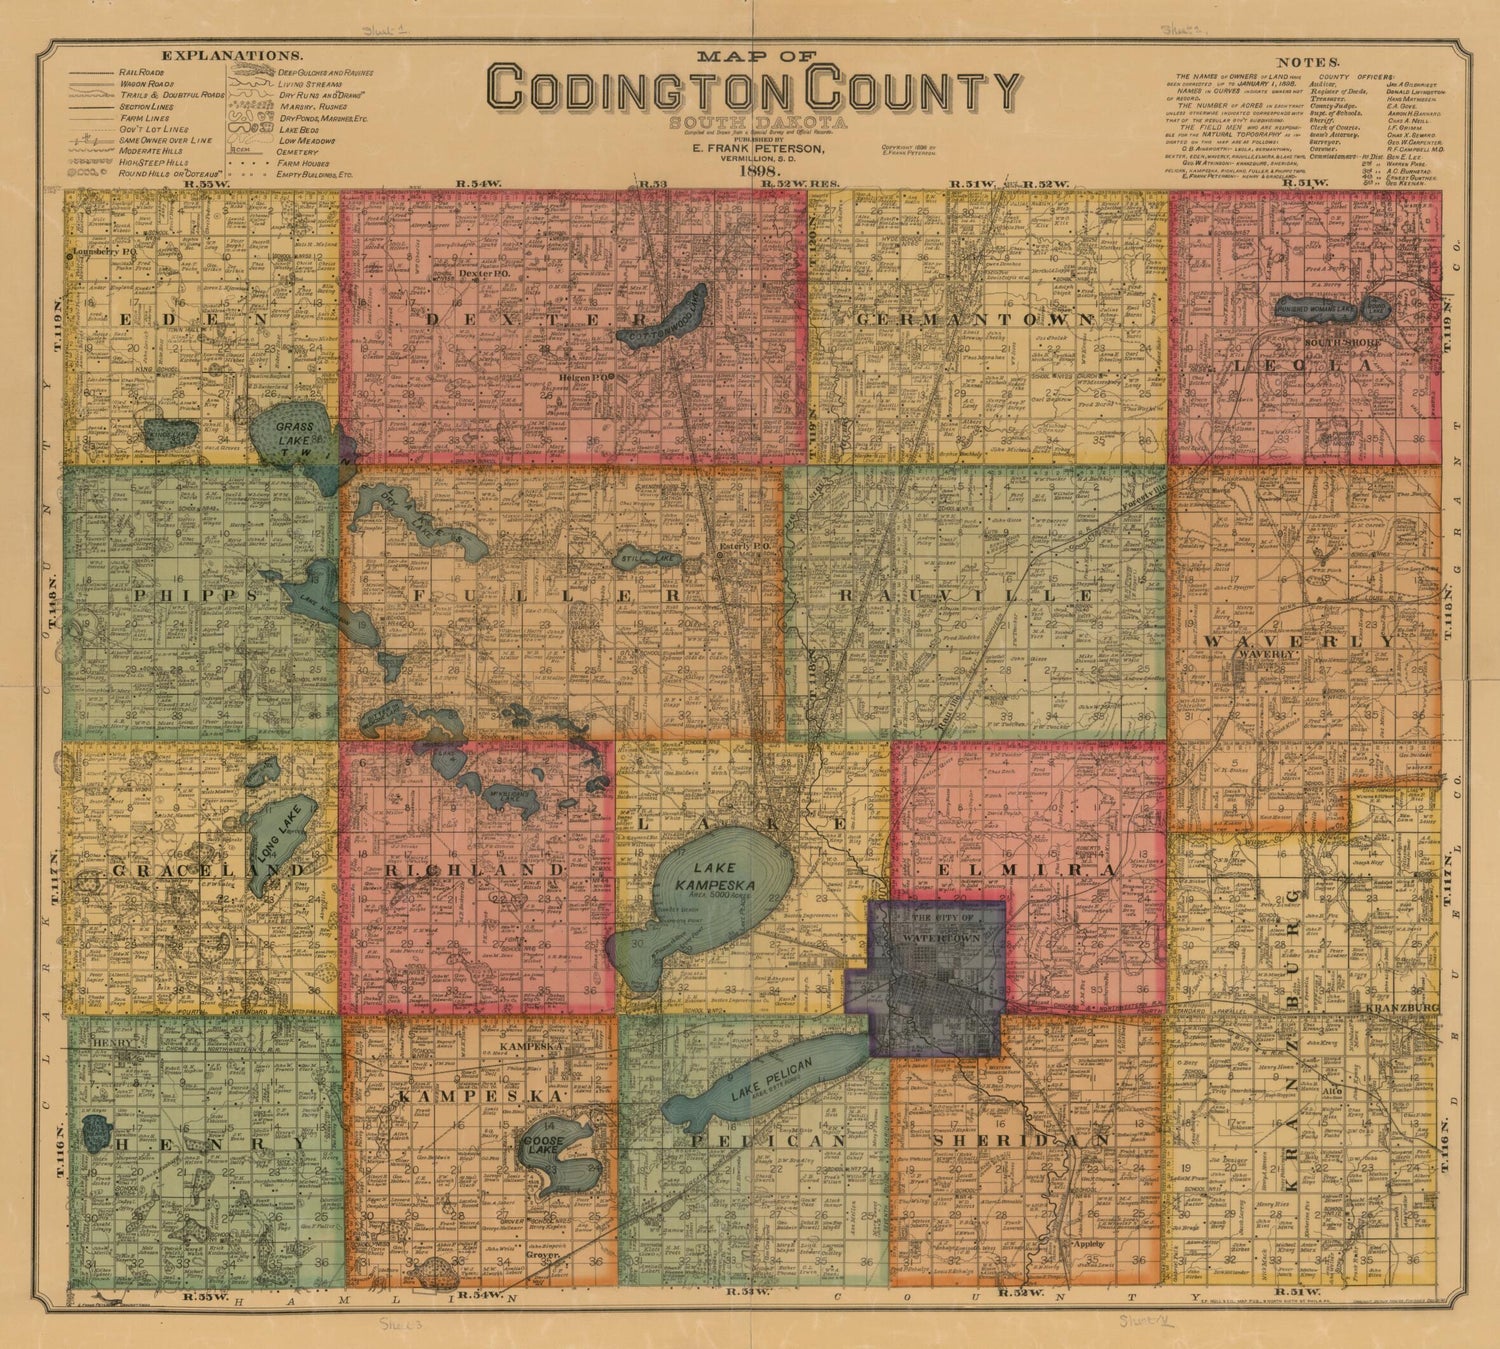 This old map of Map of Codington County, South Dakota : Compiled and Drawn from a Special Survey and Official Records from 1898 was created by  E.P. Noll &amp; Co, E. Frank Peterson in 1898